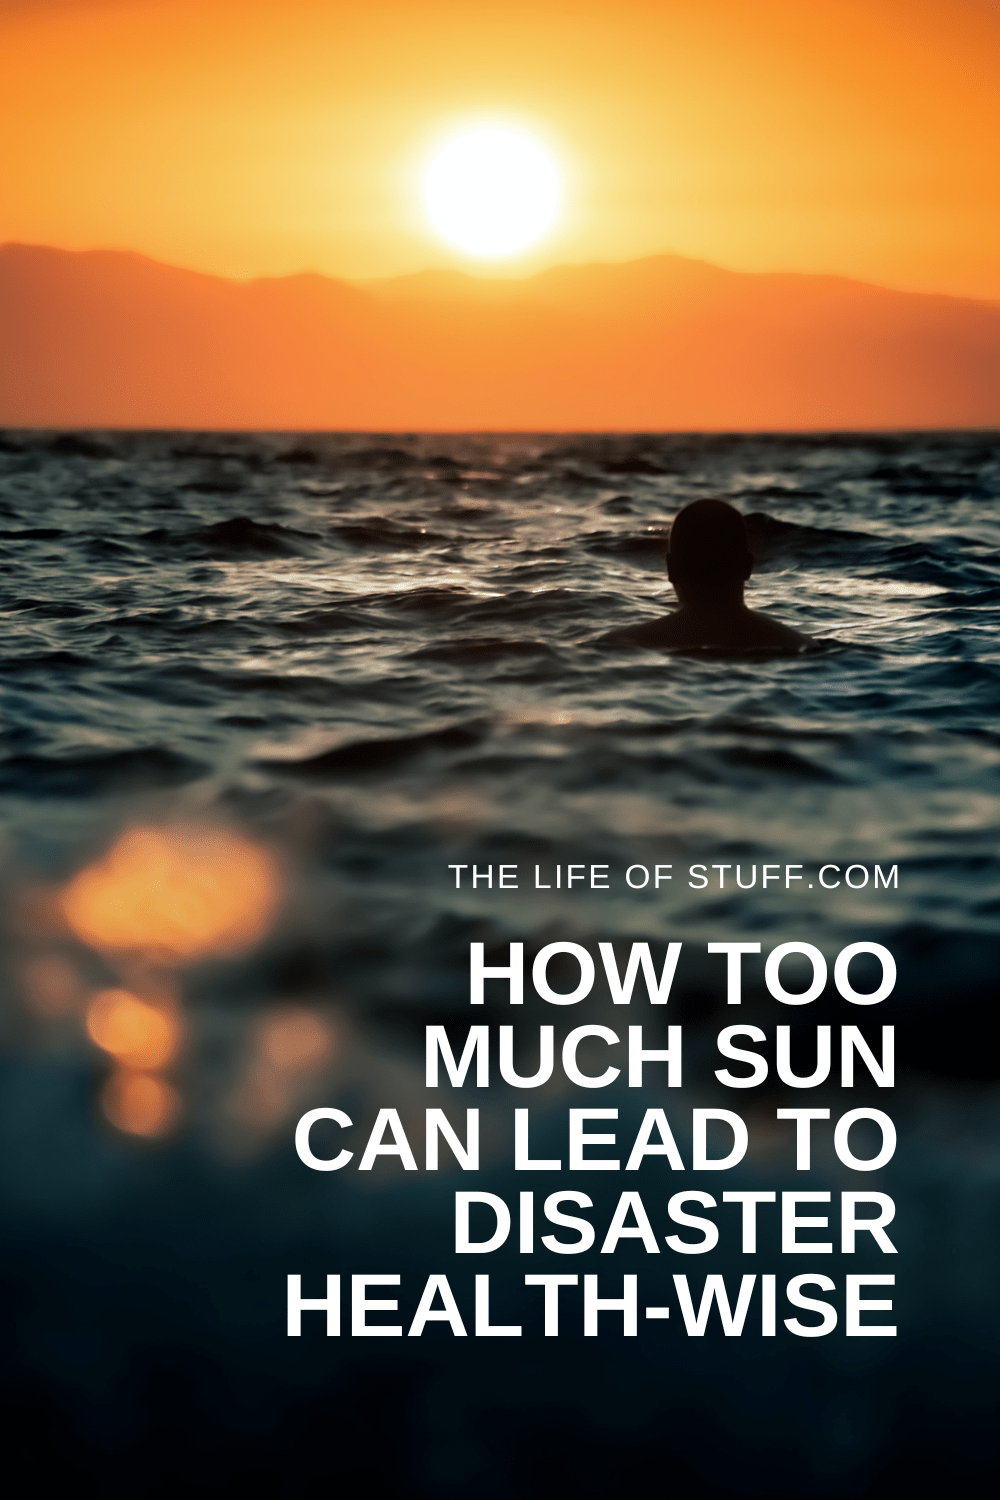 How Too Much Sun Can Lead to Disaster Health-wise - The Life of Stuff